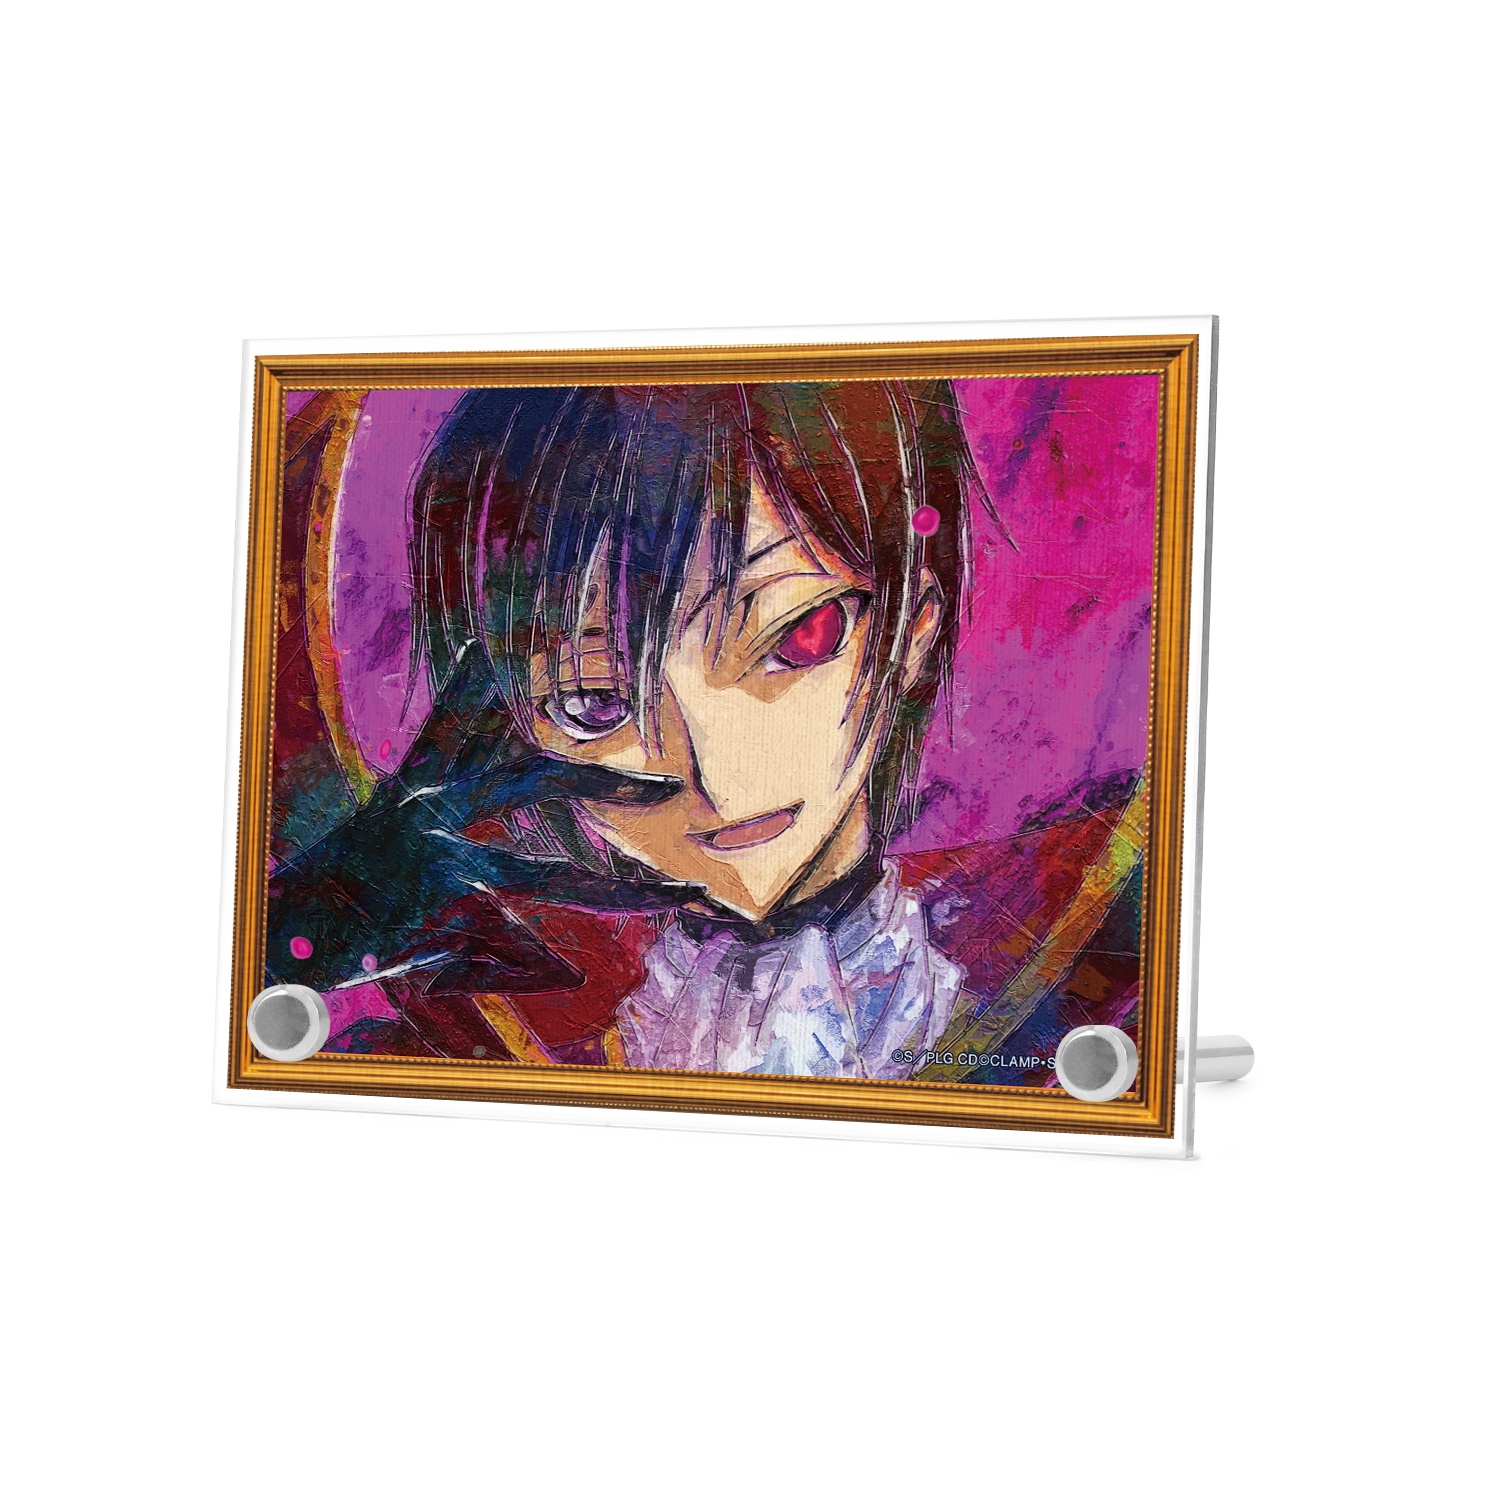 [Pre-order] "Code Geass Lelouch of the Rebellion" Lelouch Grunge Canvas A6 Acrylic Panel Ver. D